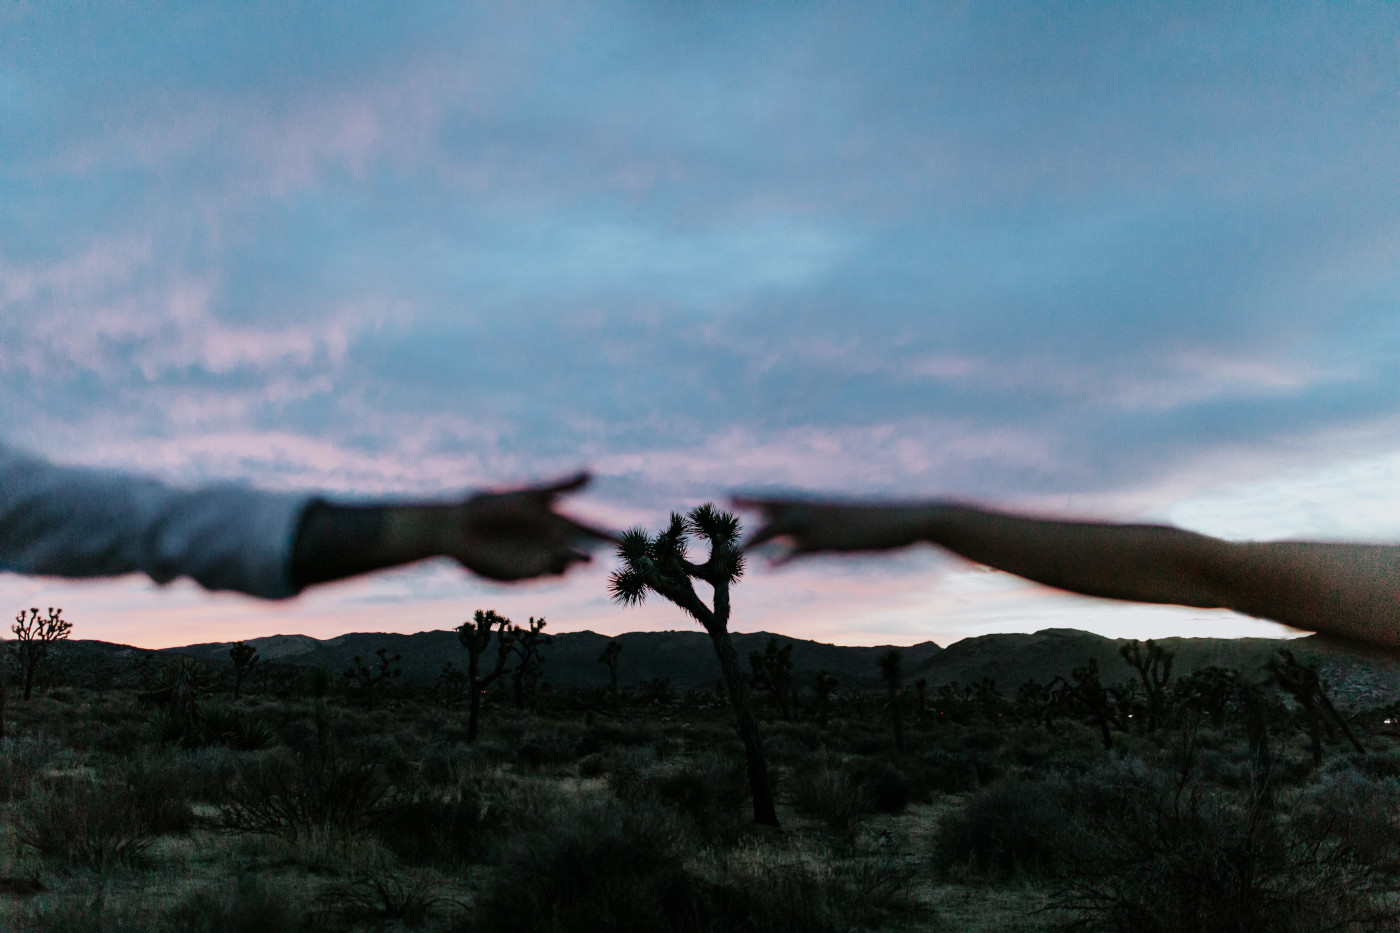 Zack and Shelby reach for each other during sunset in Joshua Tree.